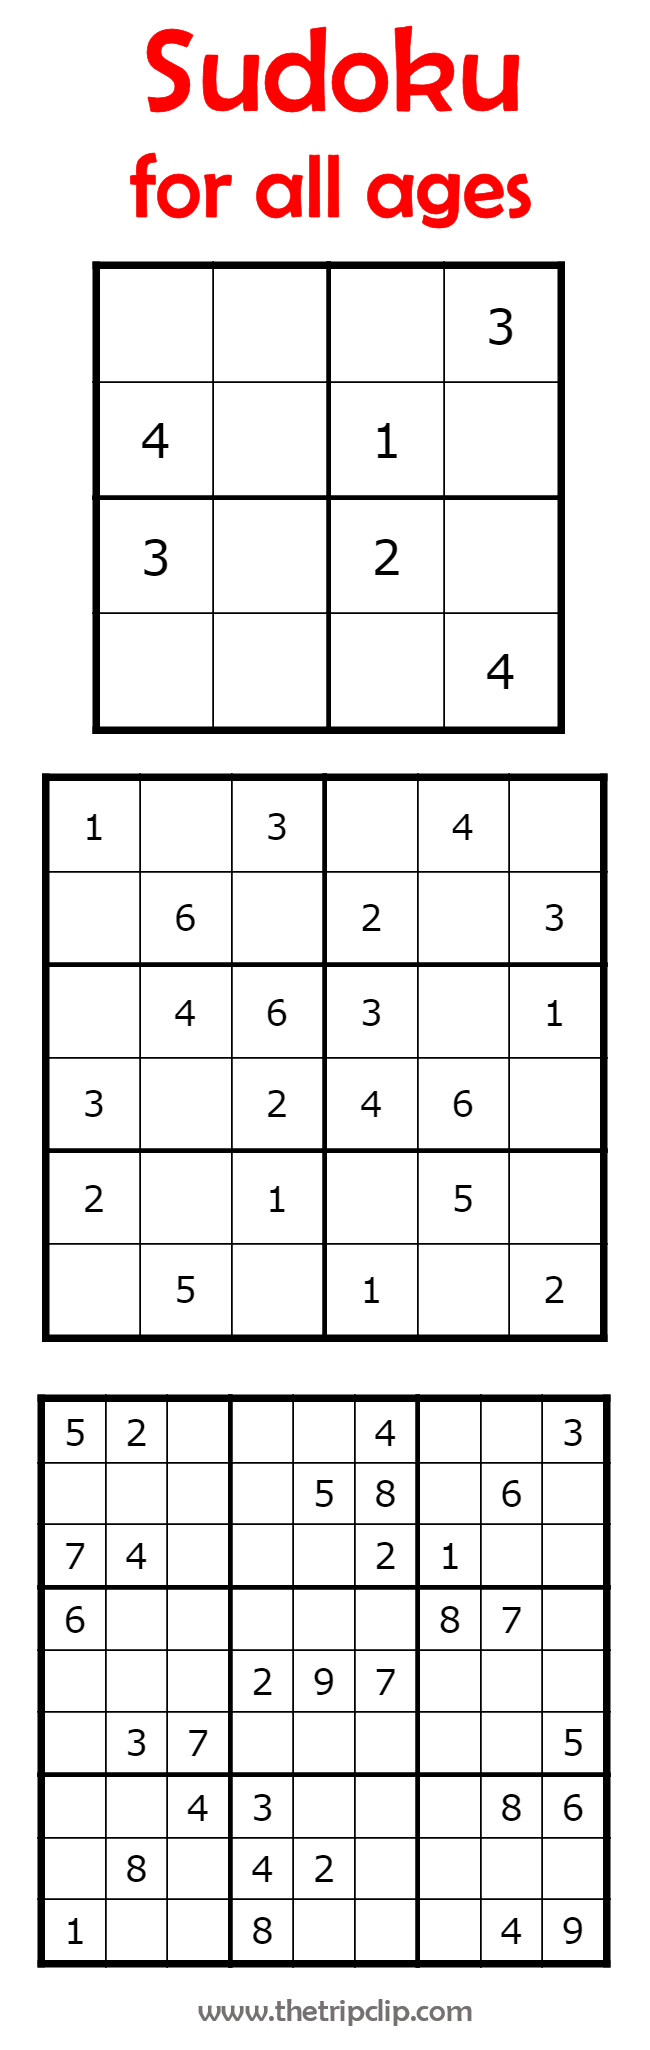 Sudoku For All Ages Plus Lots Of Other Printable Activities For Kids - Sudoku Puzzles Printable 6X6